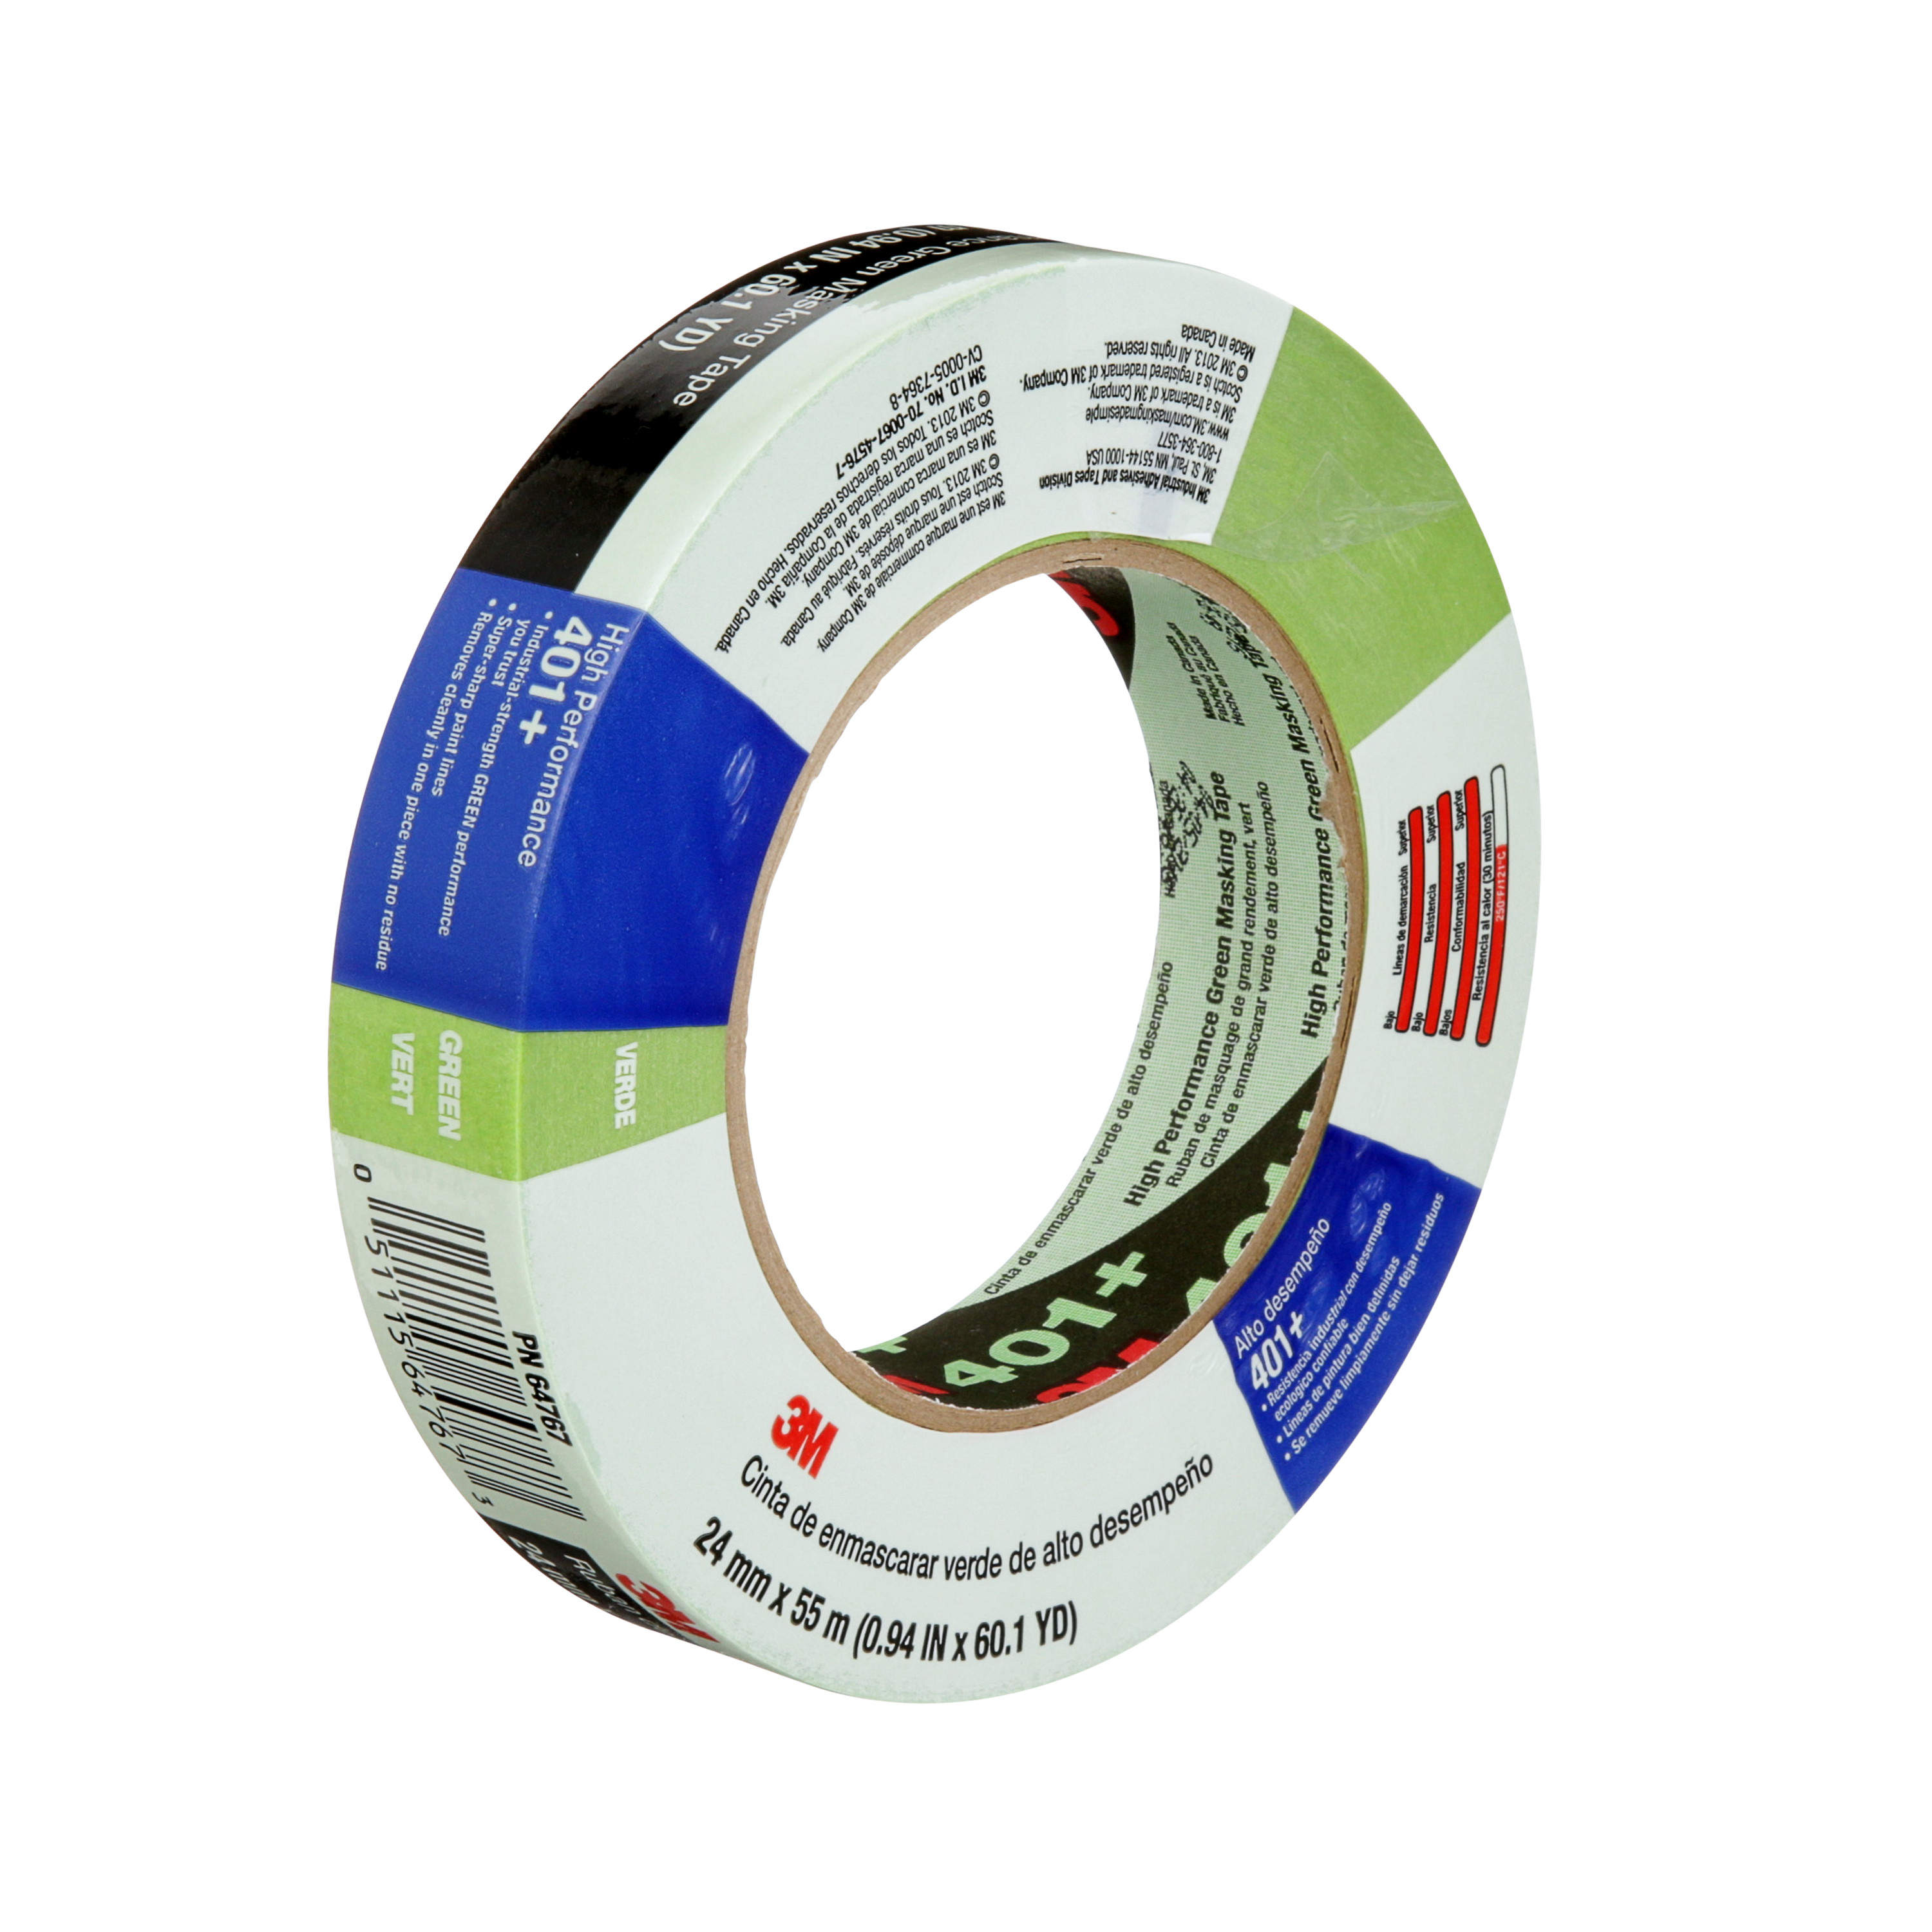 3M™ High Performance Green Masking Tape 401+, 24 mm x 55 m, 24
individually wrapped rolls per case, Conveniently Packaged